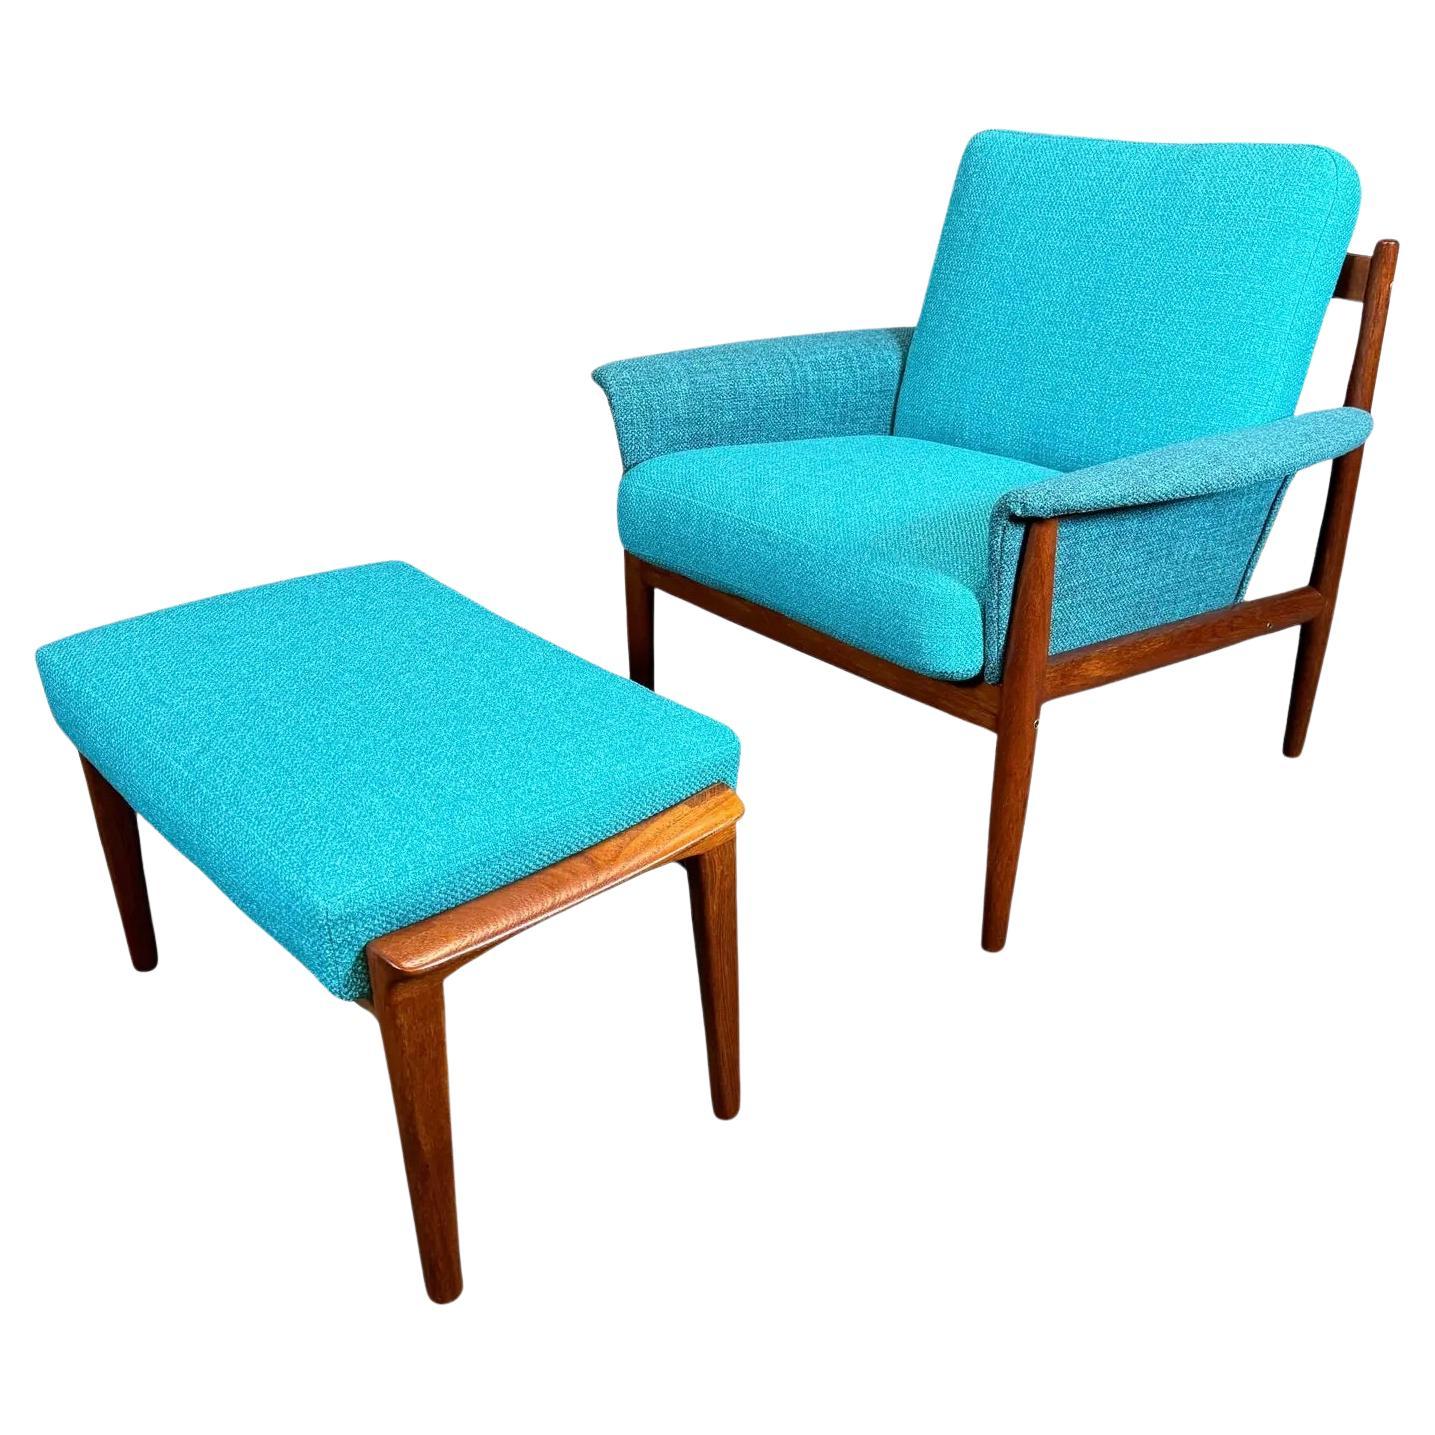 Vintage Danish Mid Century Modern Teak Lounge Chair and Ottoman by Grete Jalk For Sale